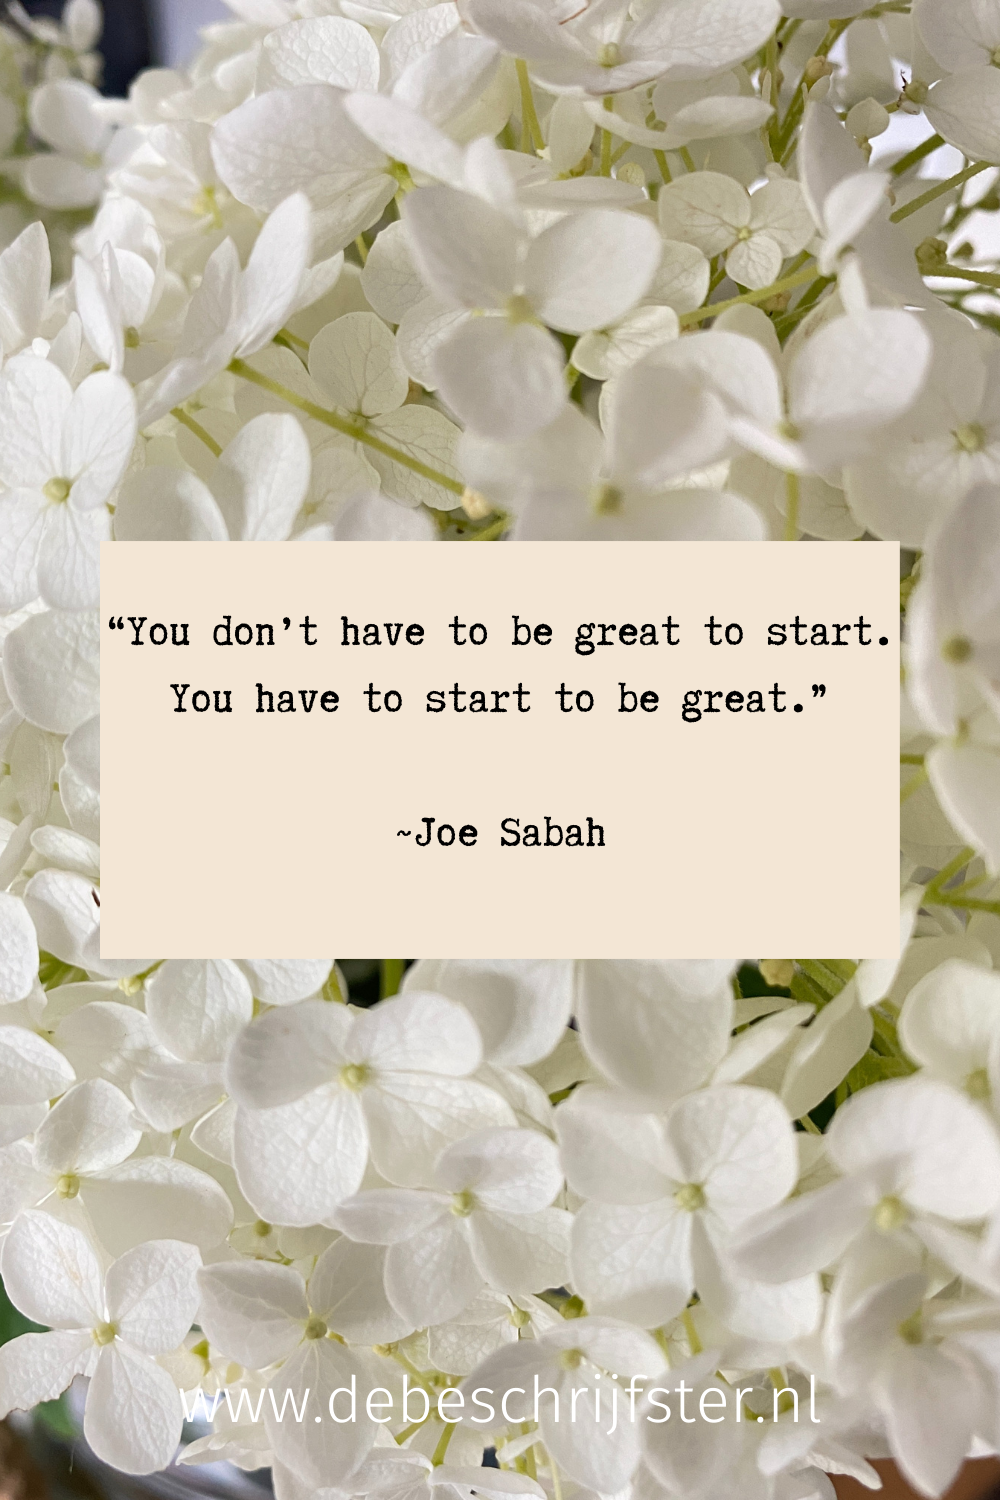 ‘You don’t have to be great to start. You have to start to be great.’ Joe Sabah